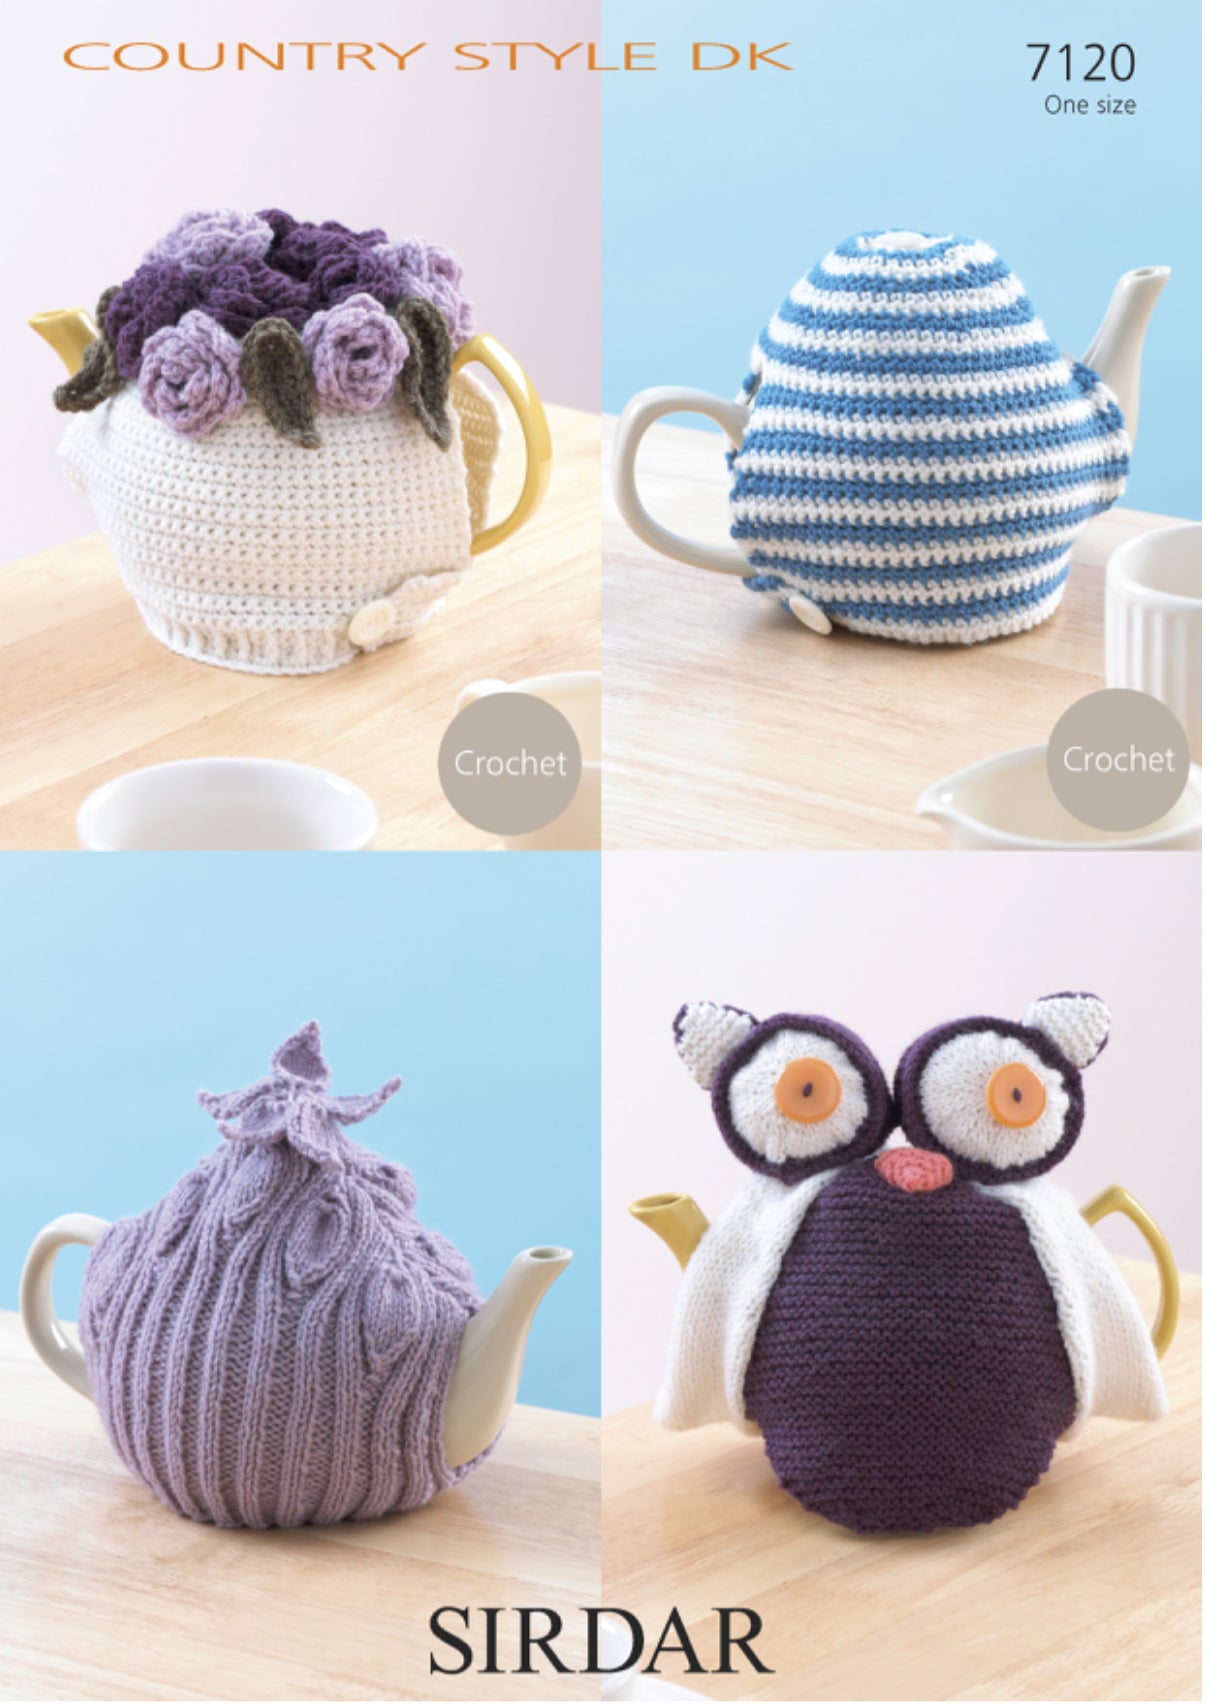 Sirdar 7120 Crochet and Knitted Tea Cosies in DK